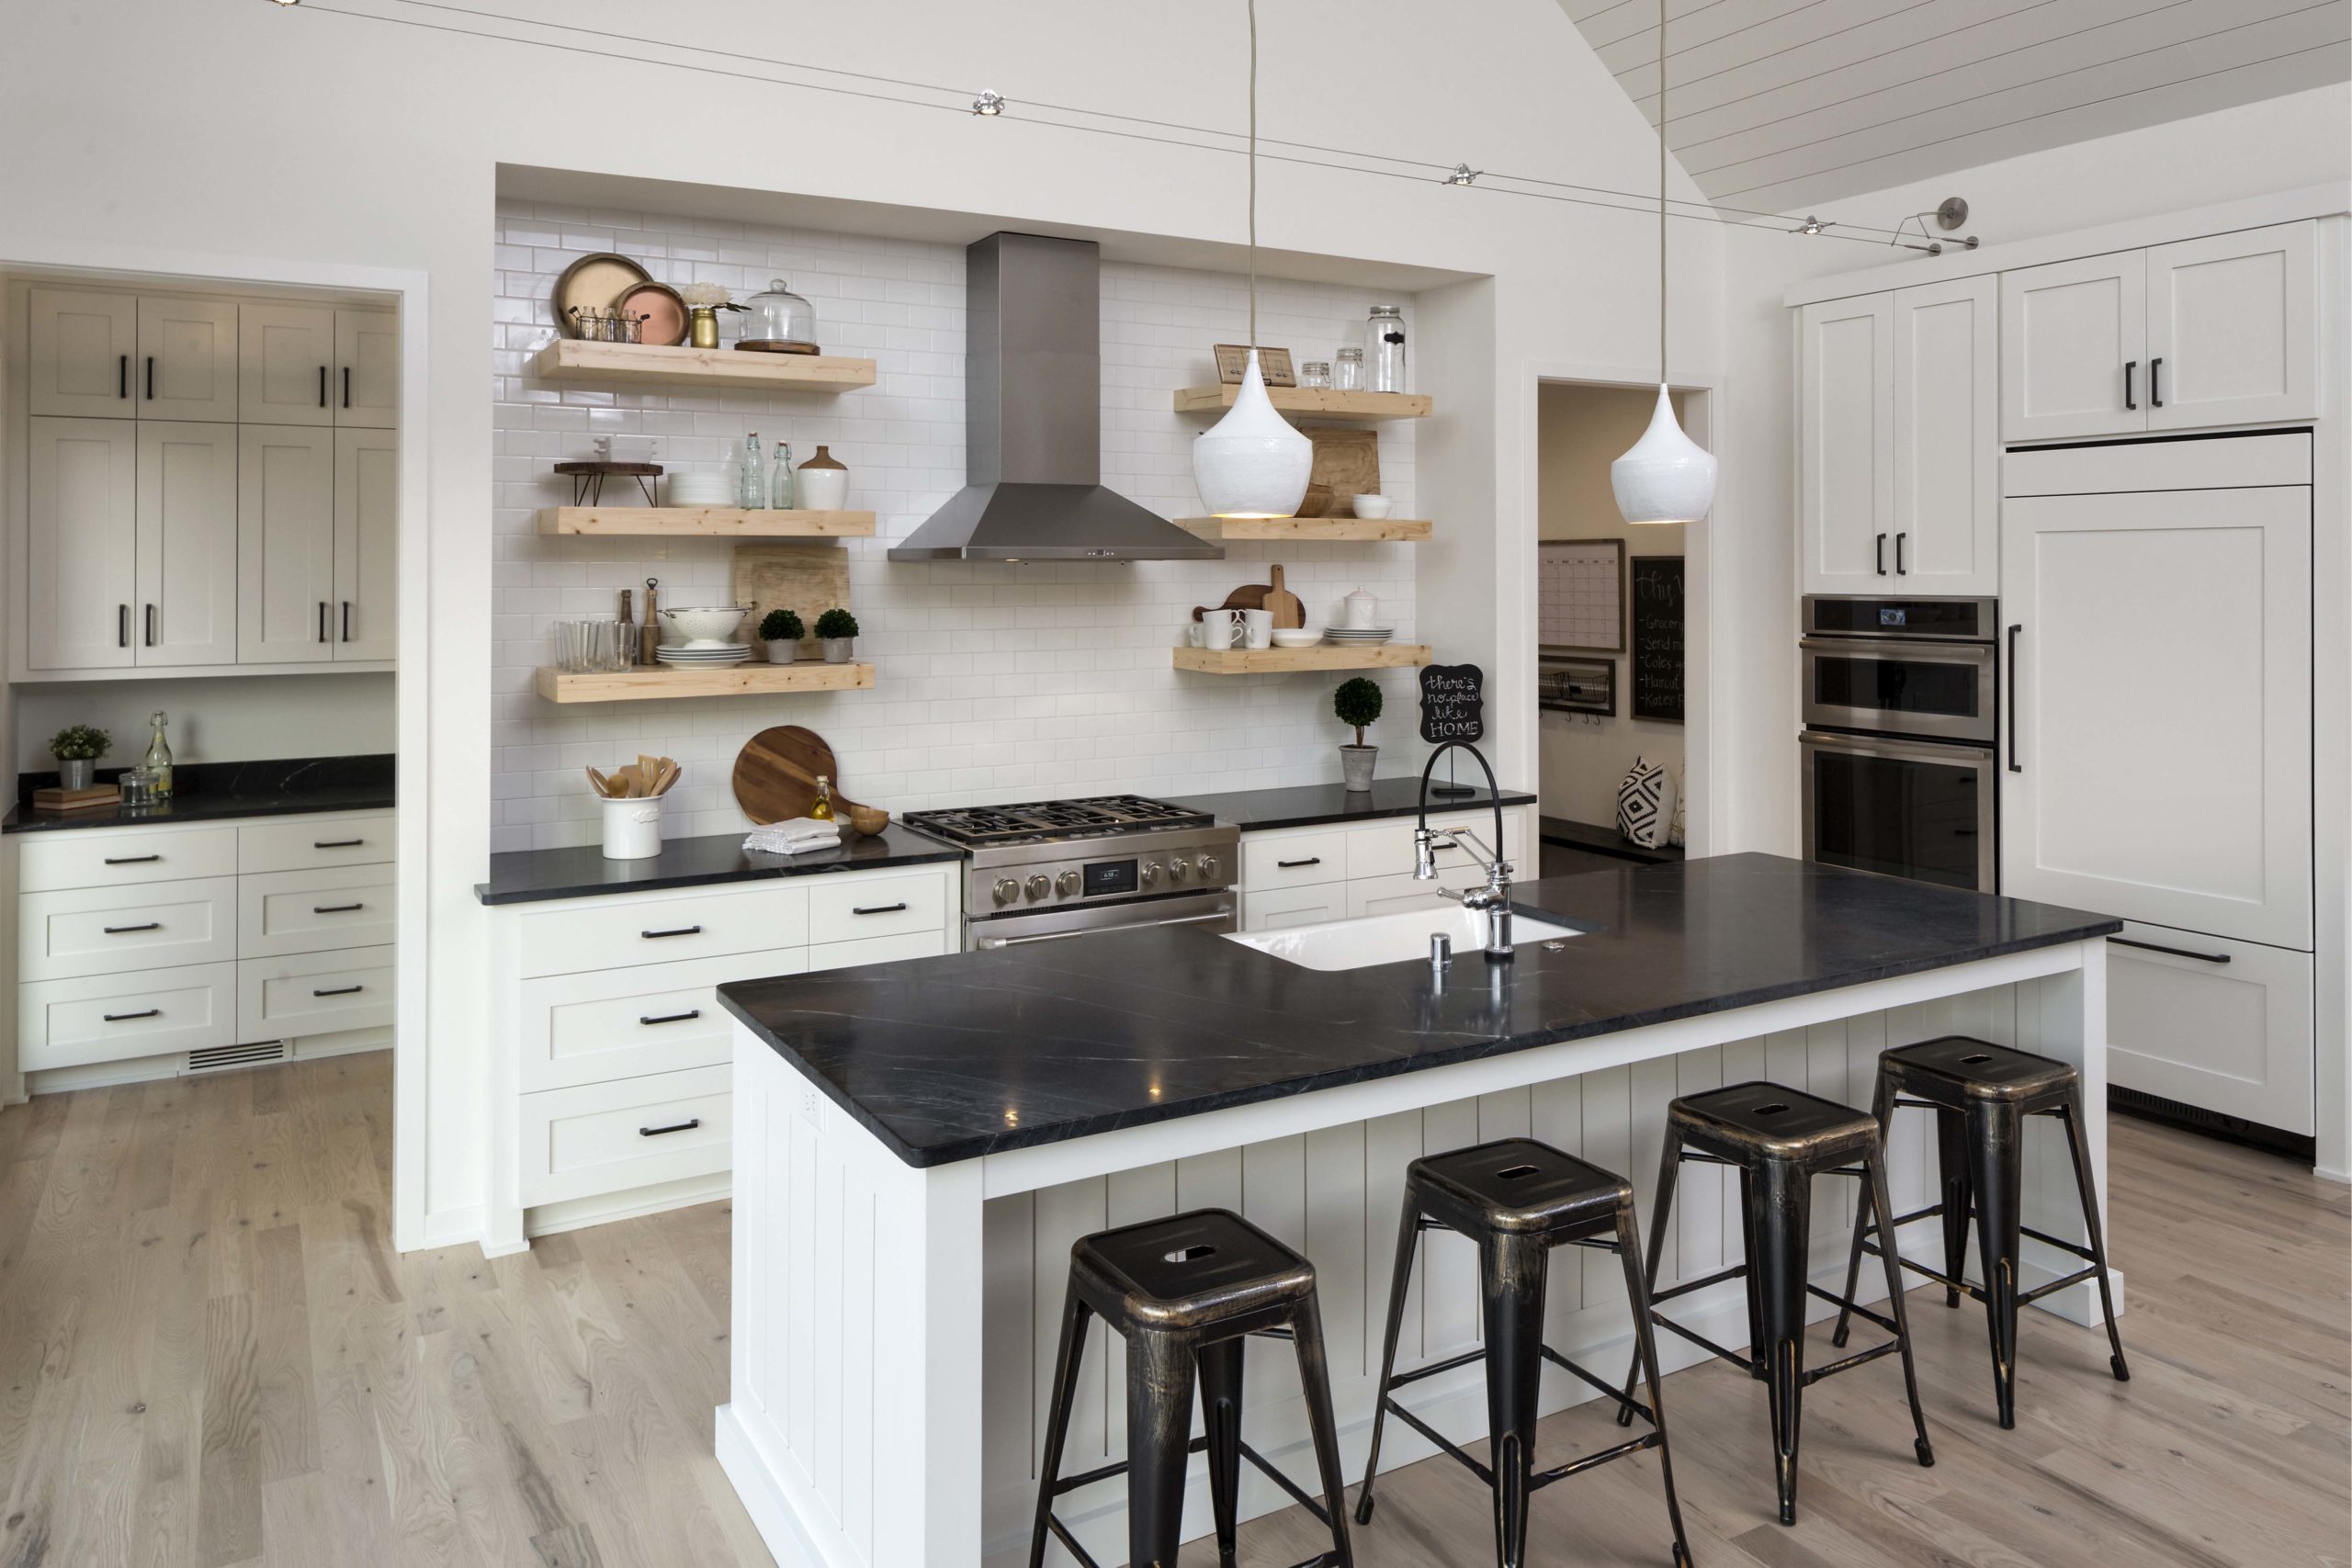 White farmhouse kitchen with open shelving, black countertops, and black metal stools